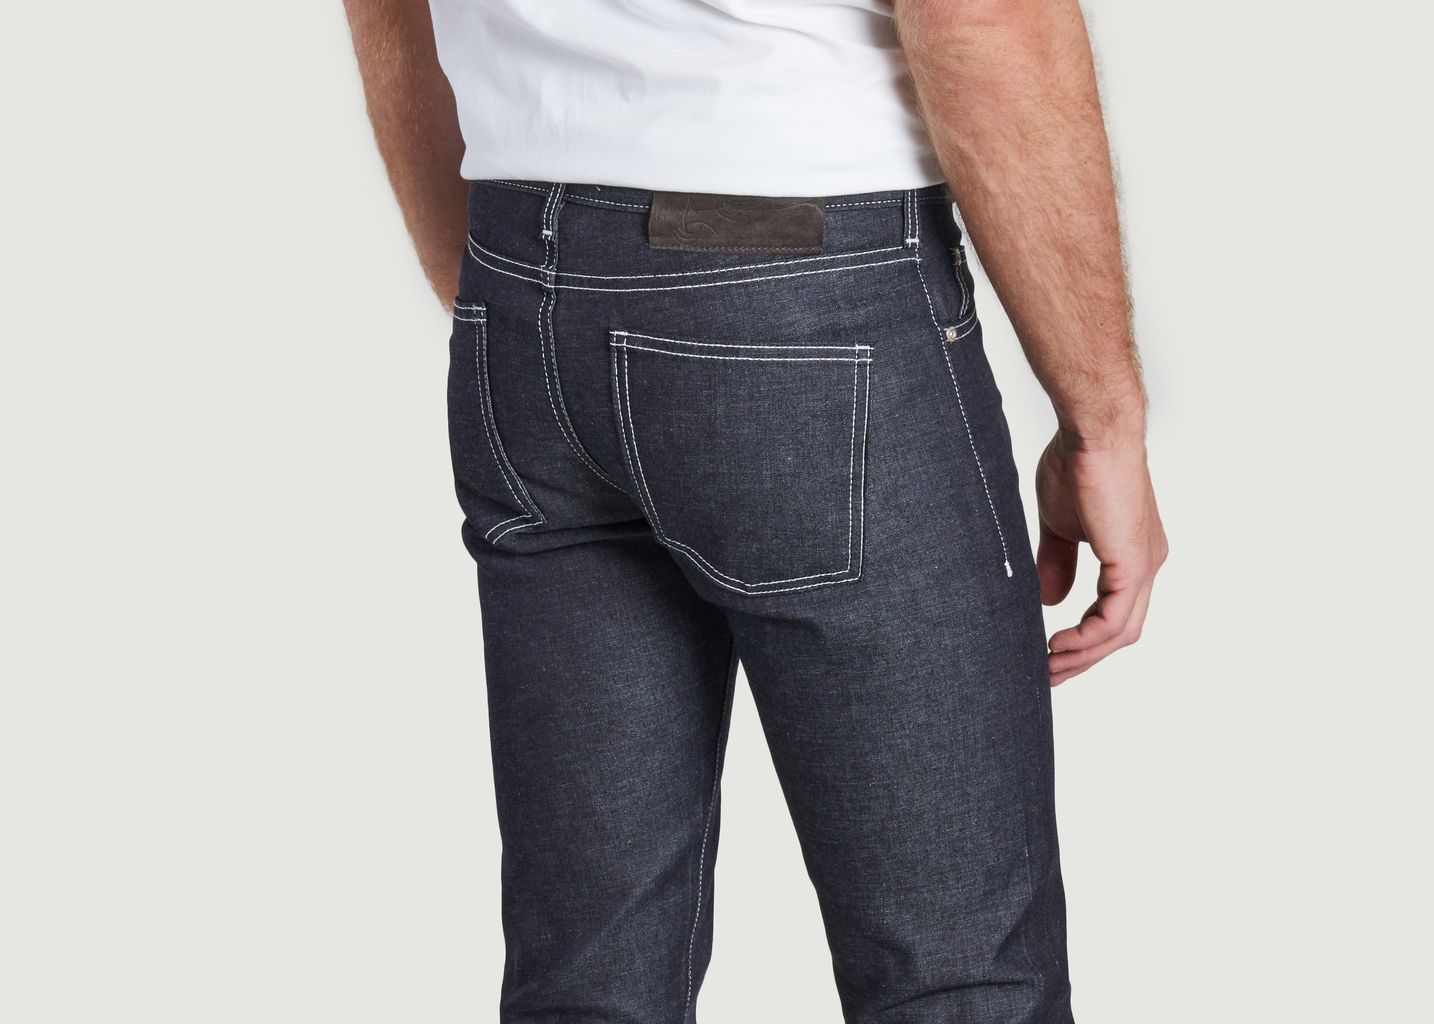 Blue Jay Selvedge Super Guy Jeans - Naked and Famous